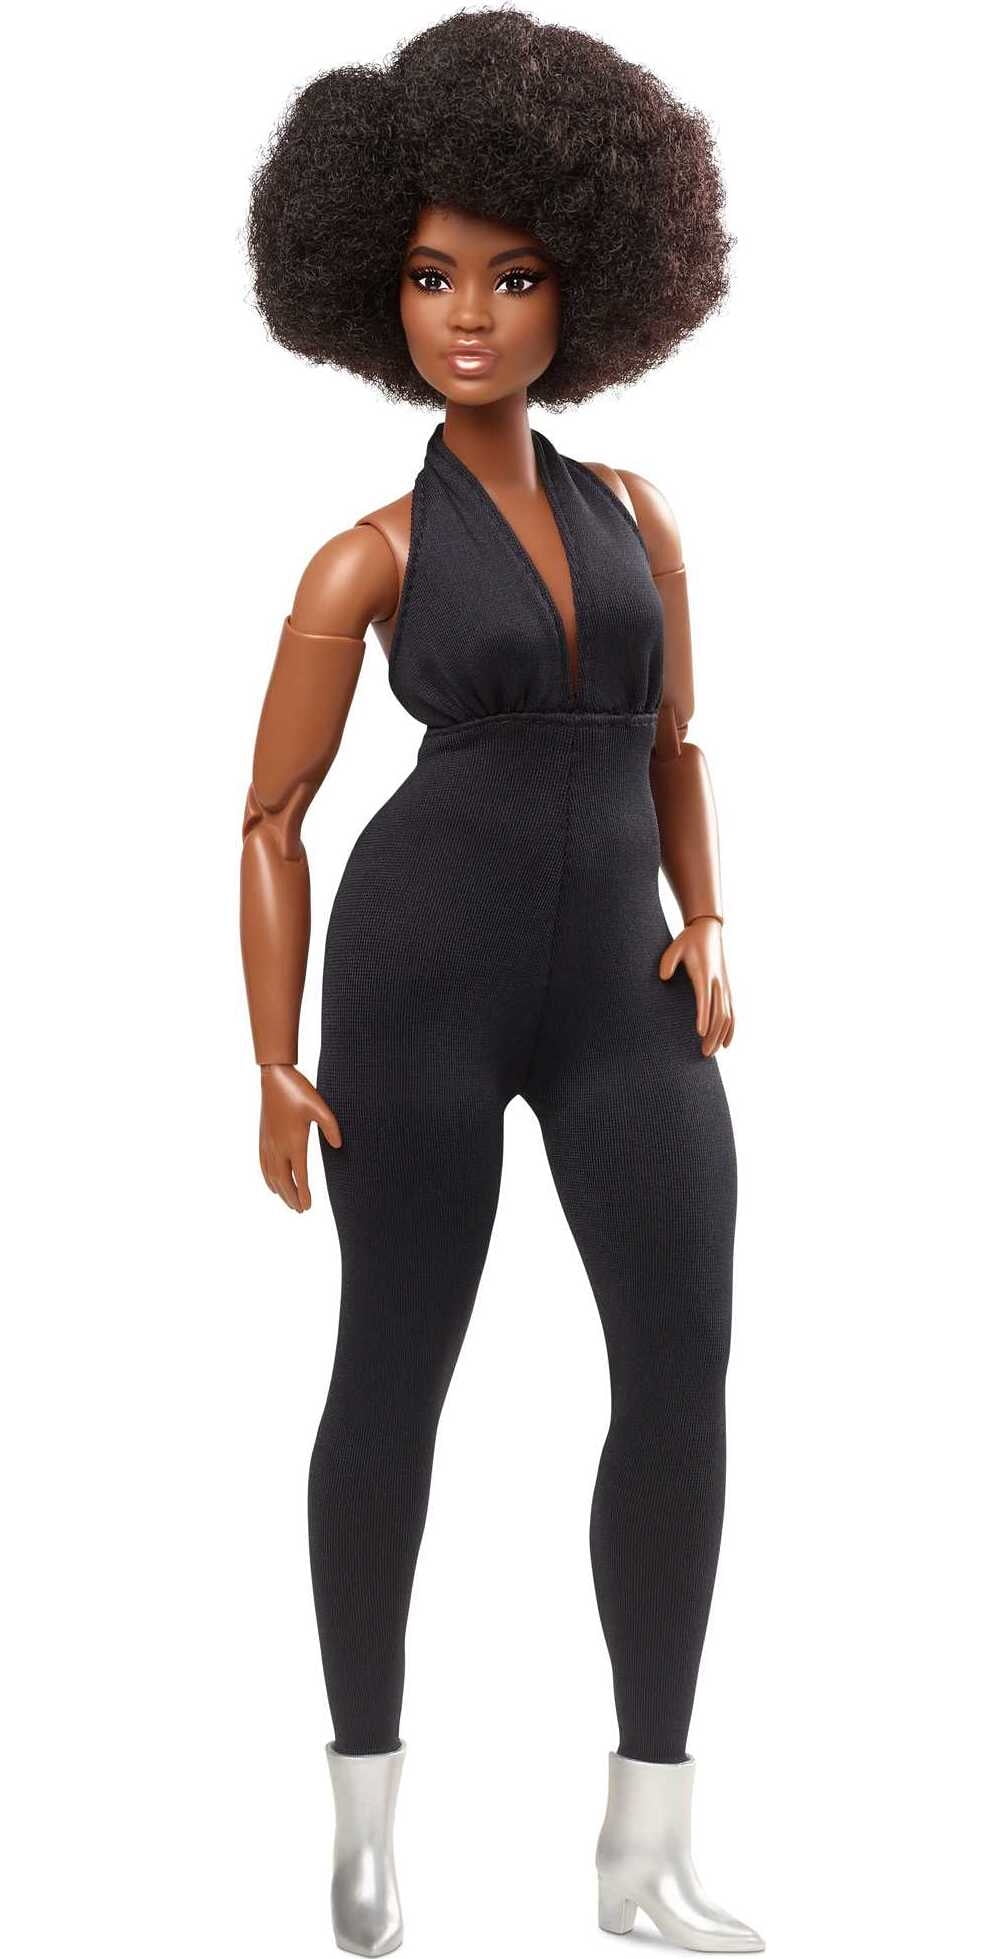 Barbie Looks Fashion Doll, with Natural Hair Black Jumpsuit -